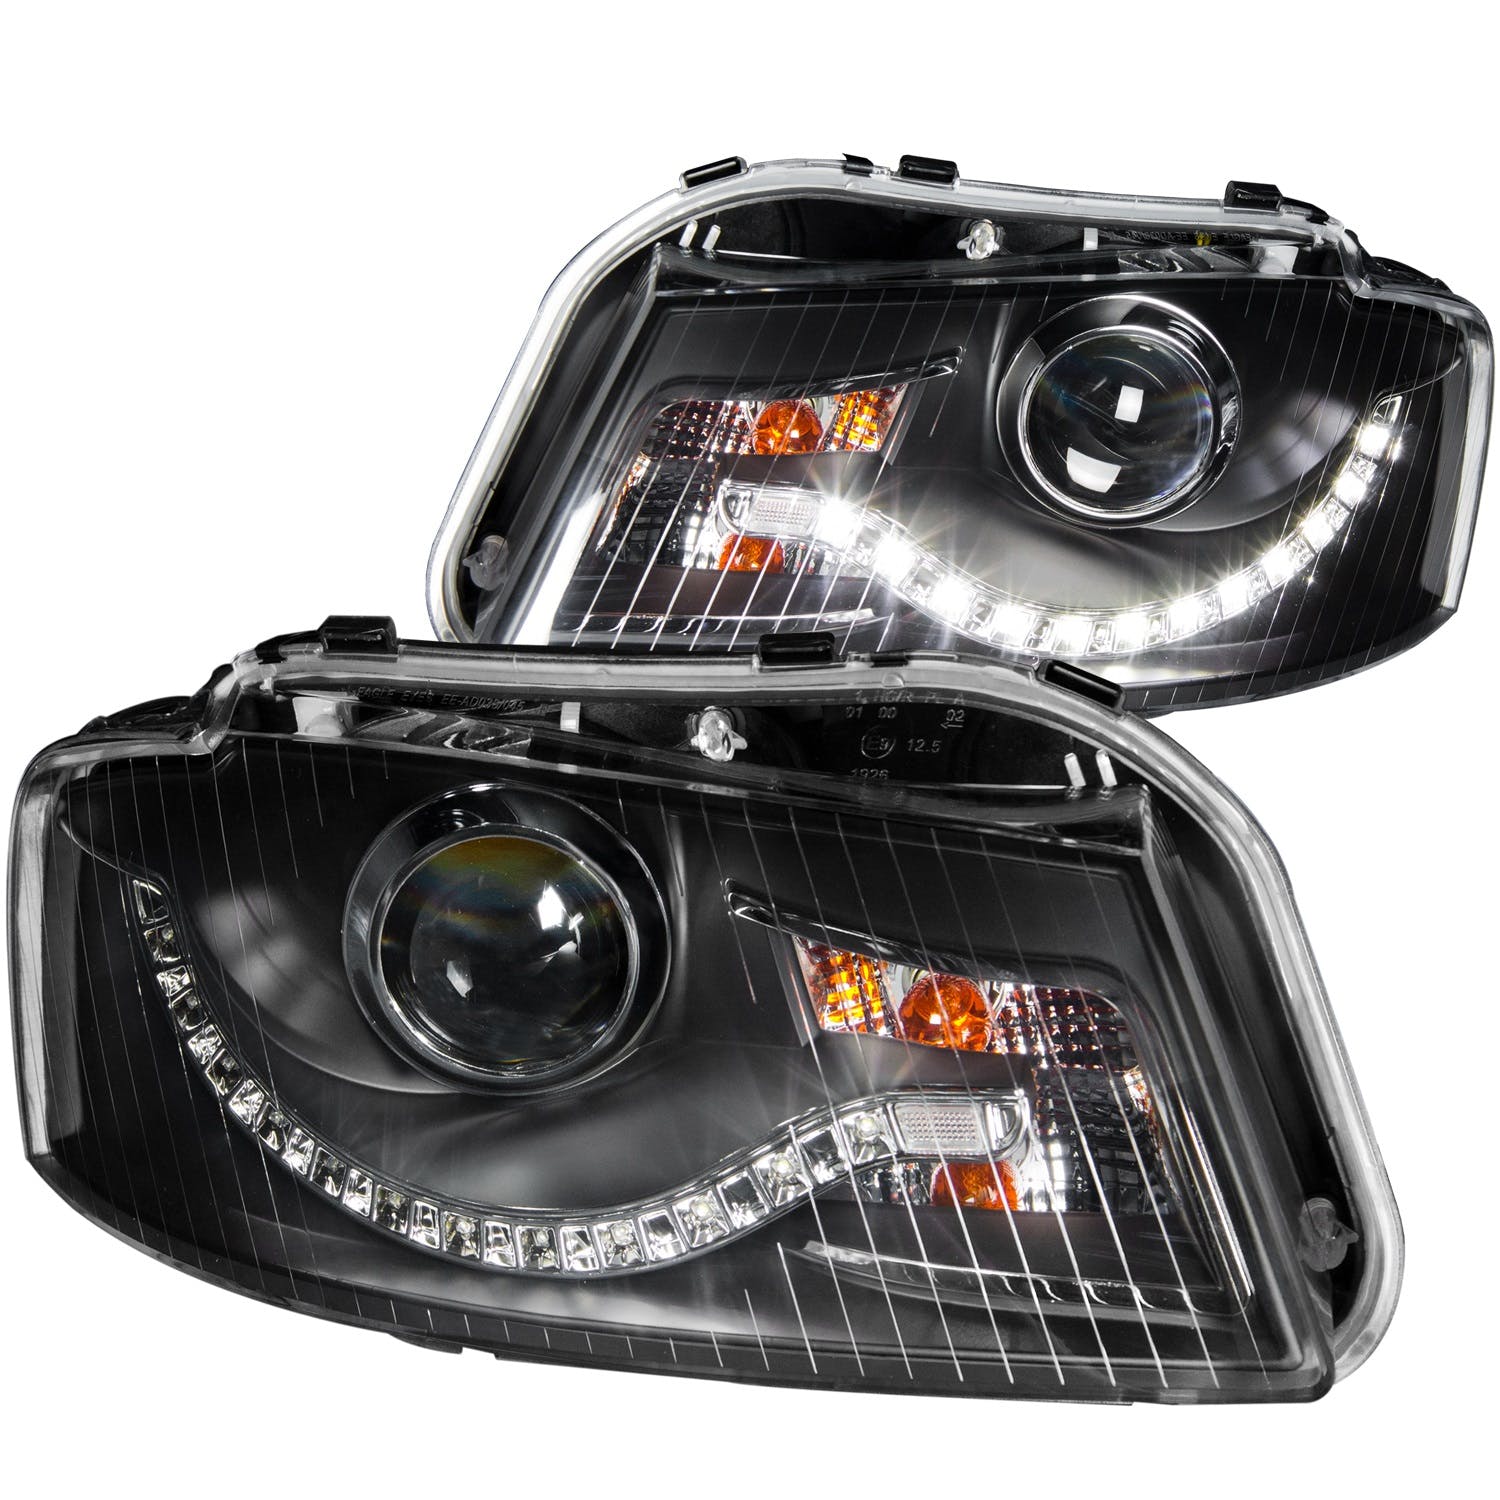 AnzoUSA 121322 Projector Headlights Black (R8 LED Style)